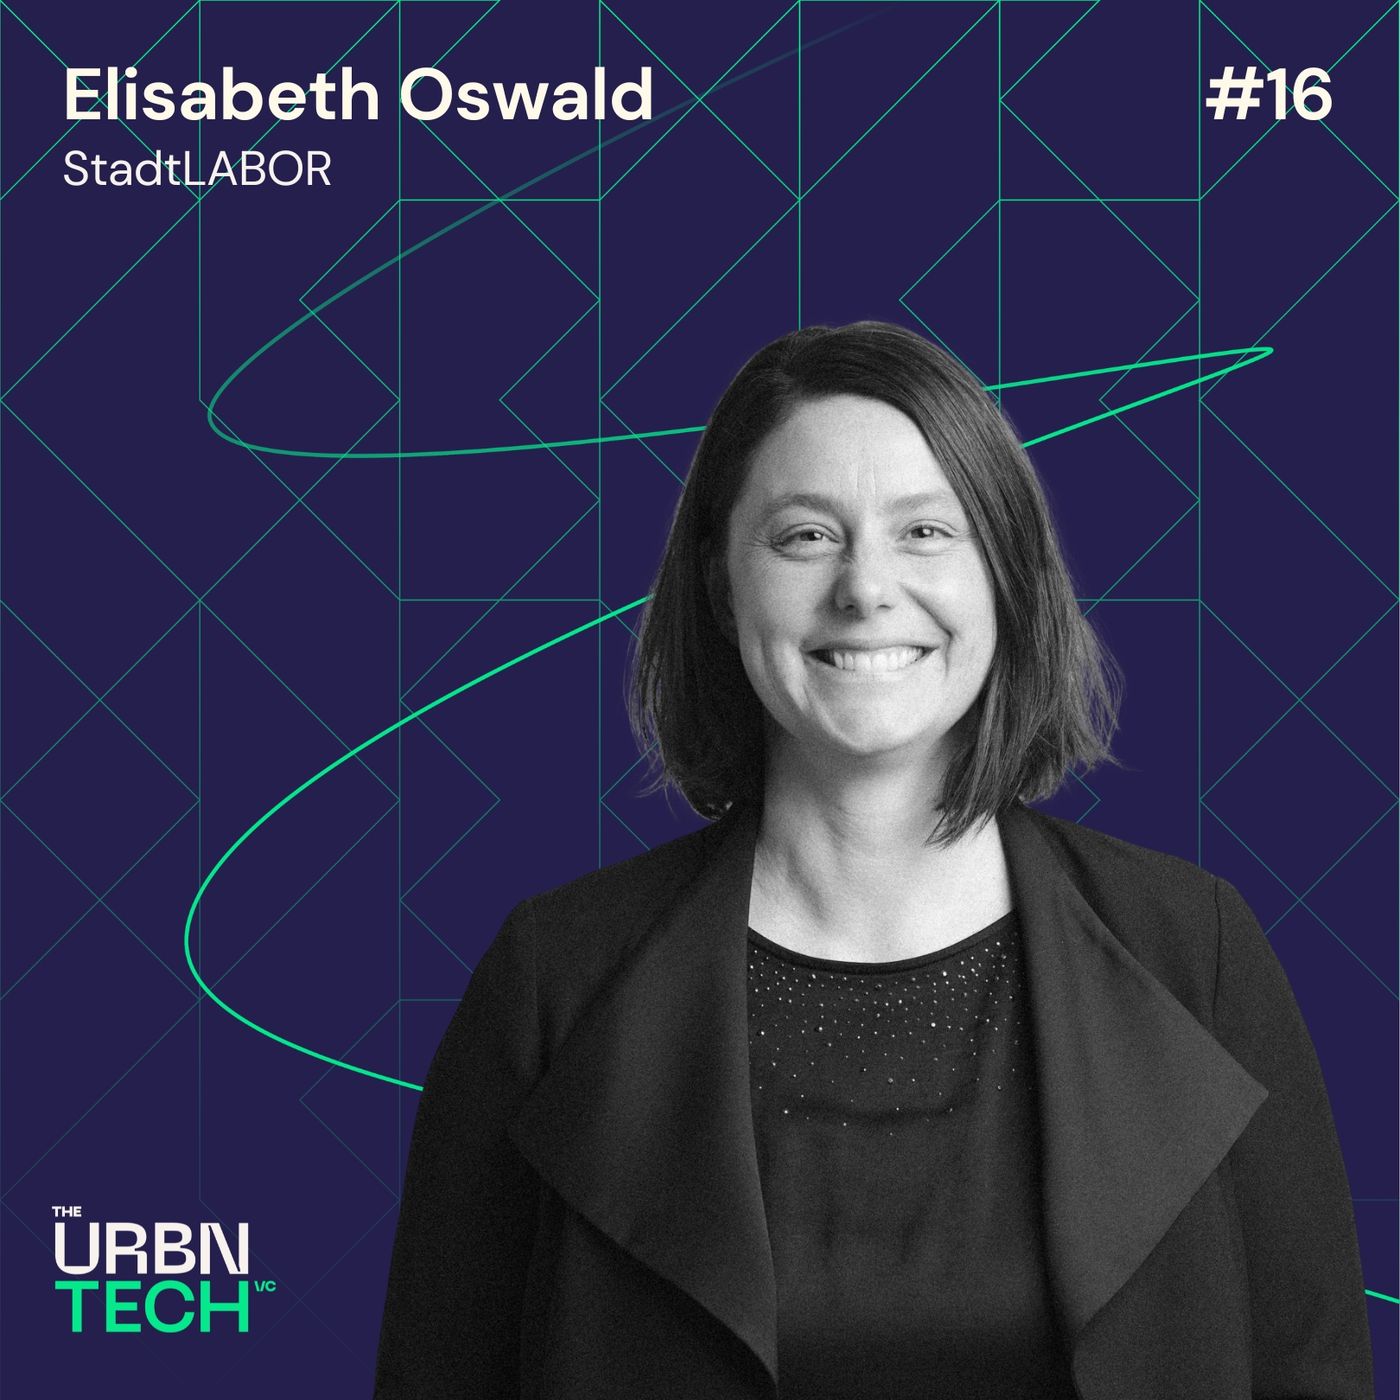 #16 The power of collaboration when renovating cities - an expert’s view - Elisabeth Oswald, StadtLABOR